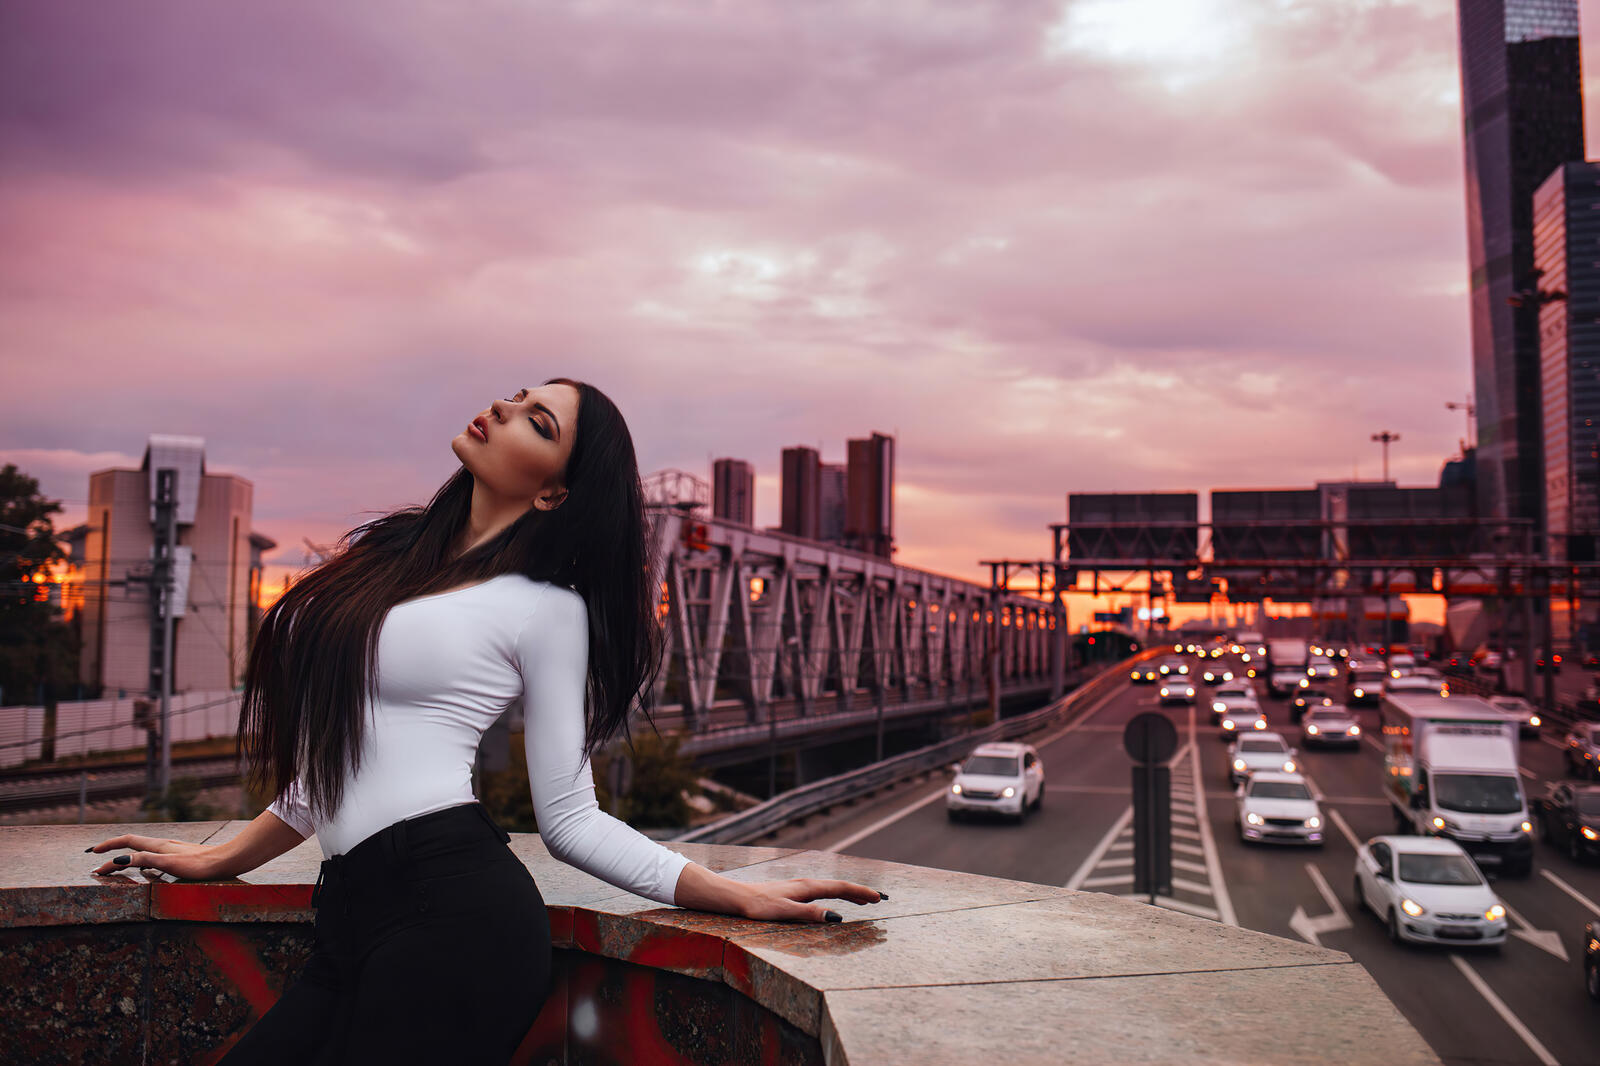 Free photo A brunette poses in front of an expressway